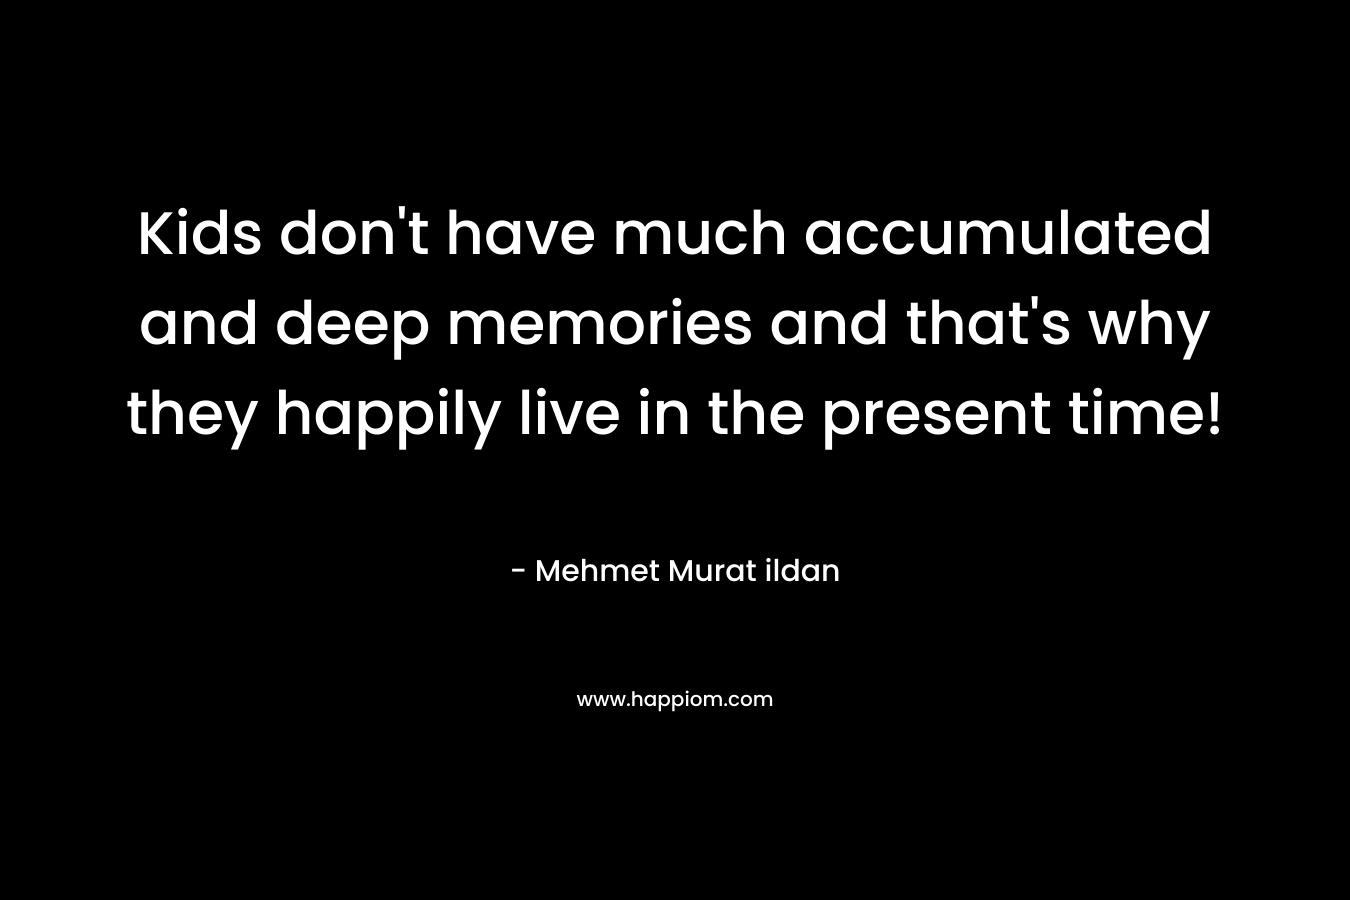 Kids don’t have much accumulated and deep memories and that’s why they happily live in the present time! – Mehmet Murat ildan